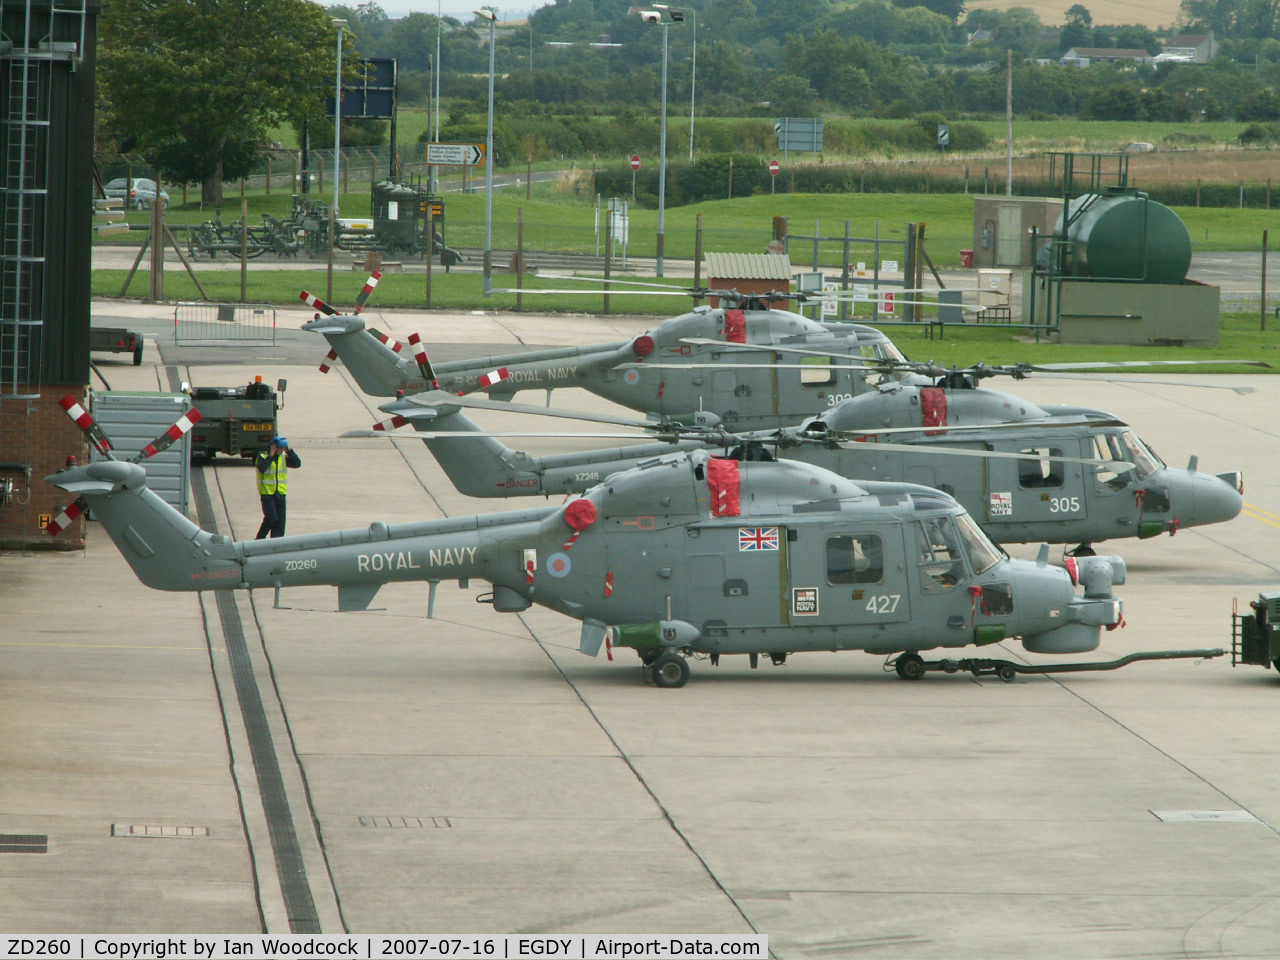 ZD260, 1983 Westland Lynx HAS.8DSP C/N 292, Westland Lynx HMA.8/With others on the ramp at Yeovilton